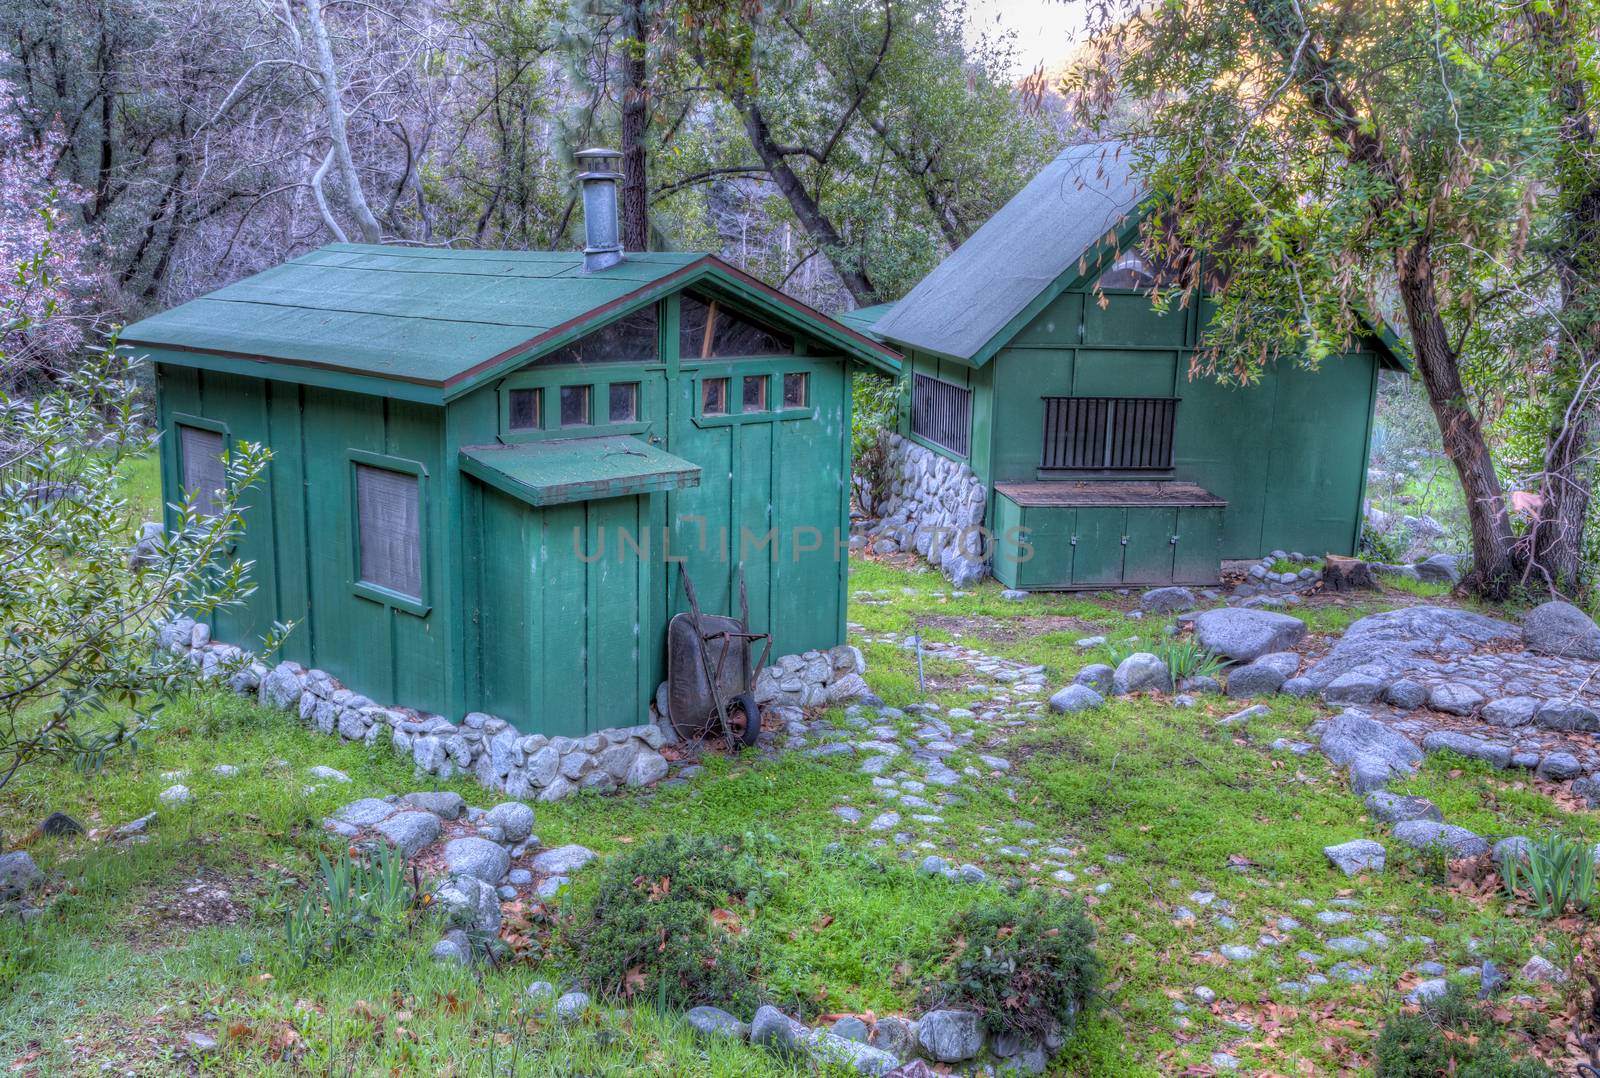 Green Cabin and Shed in the Angeles National Forest by wolterk